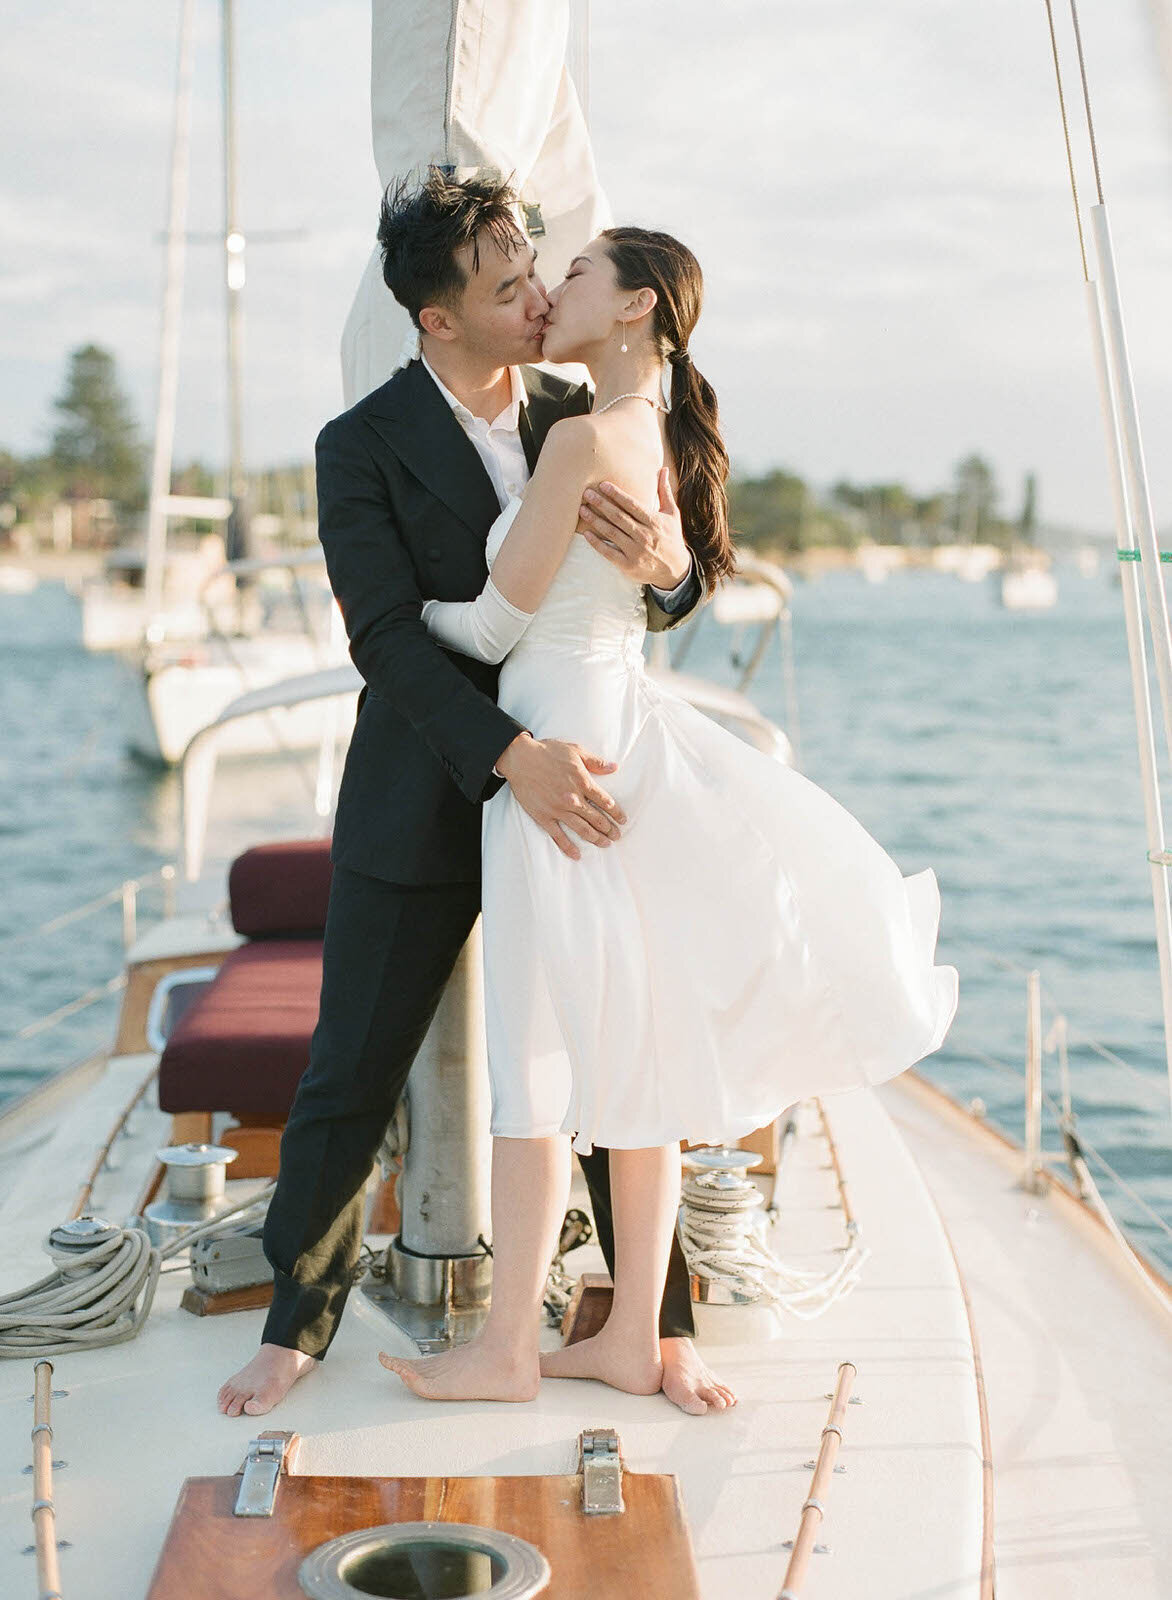 engaged couple's kiss on a sailboat